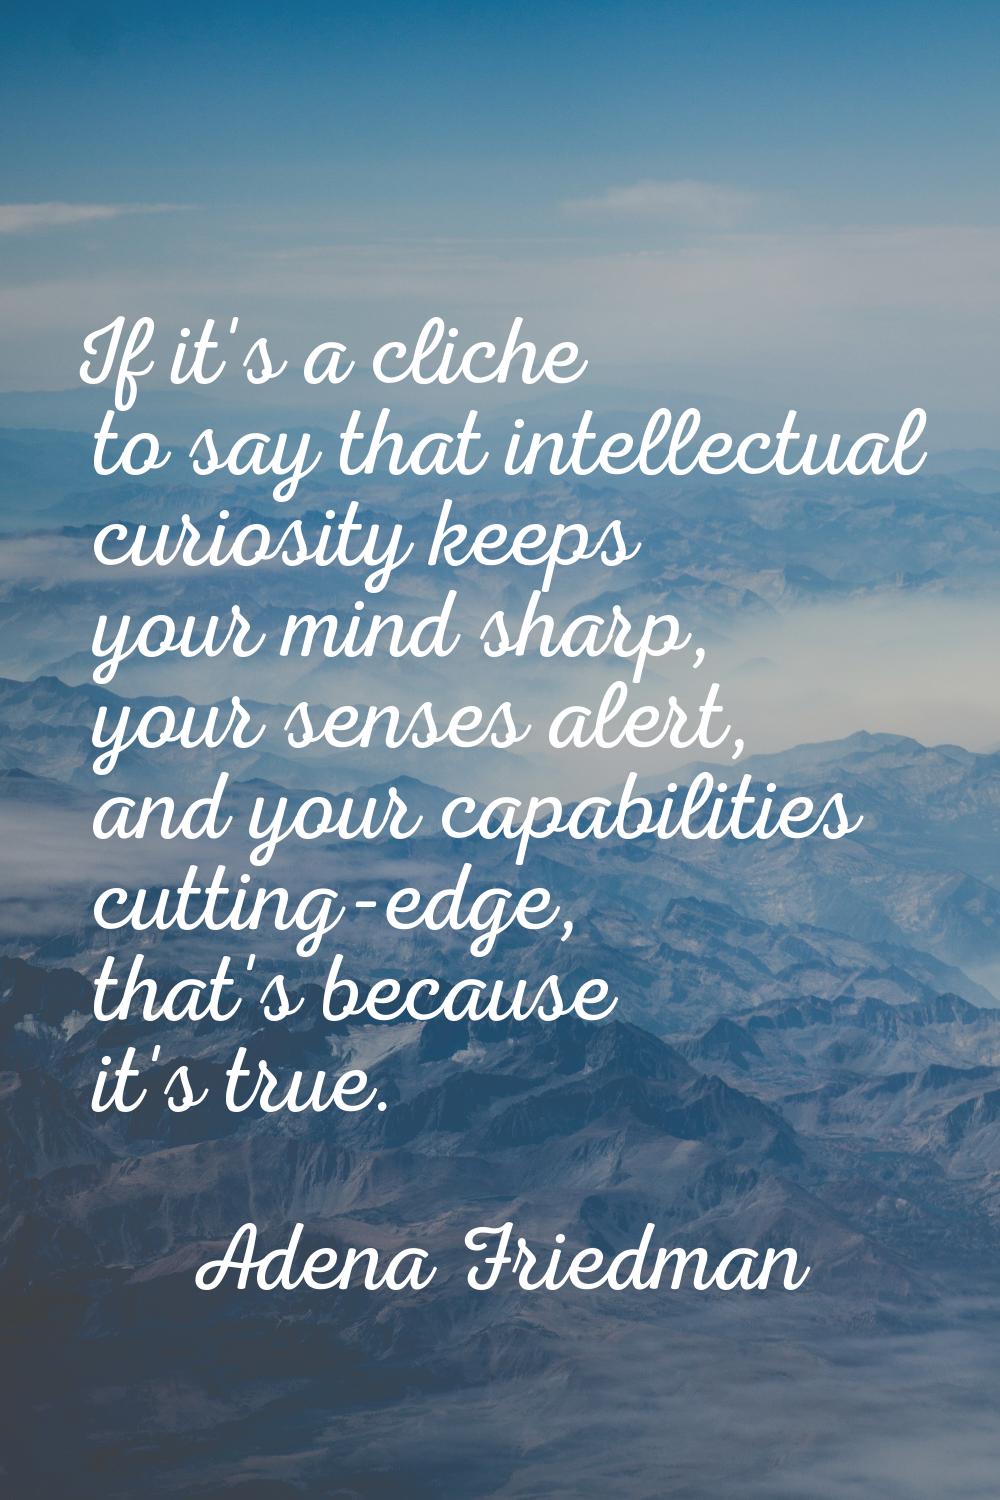 If it's a cliche to say that intellectual curiosity keeps your mind sharp, your senses alert, and y